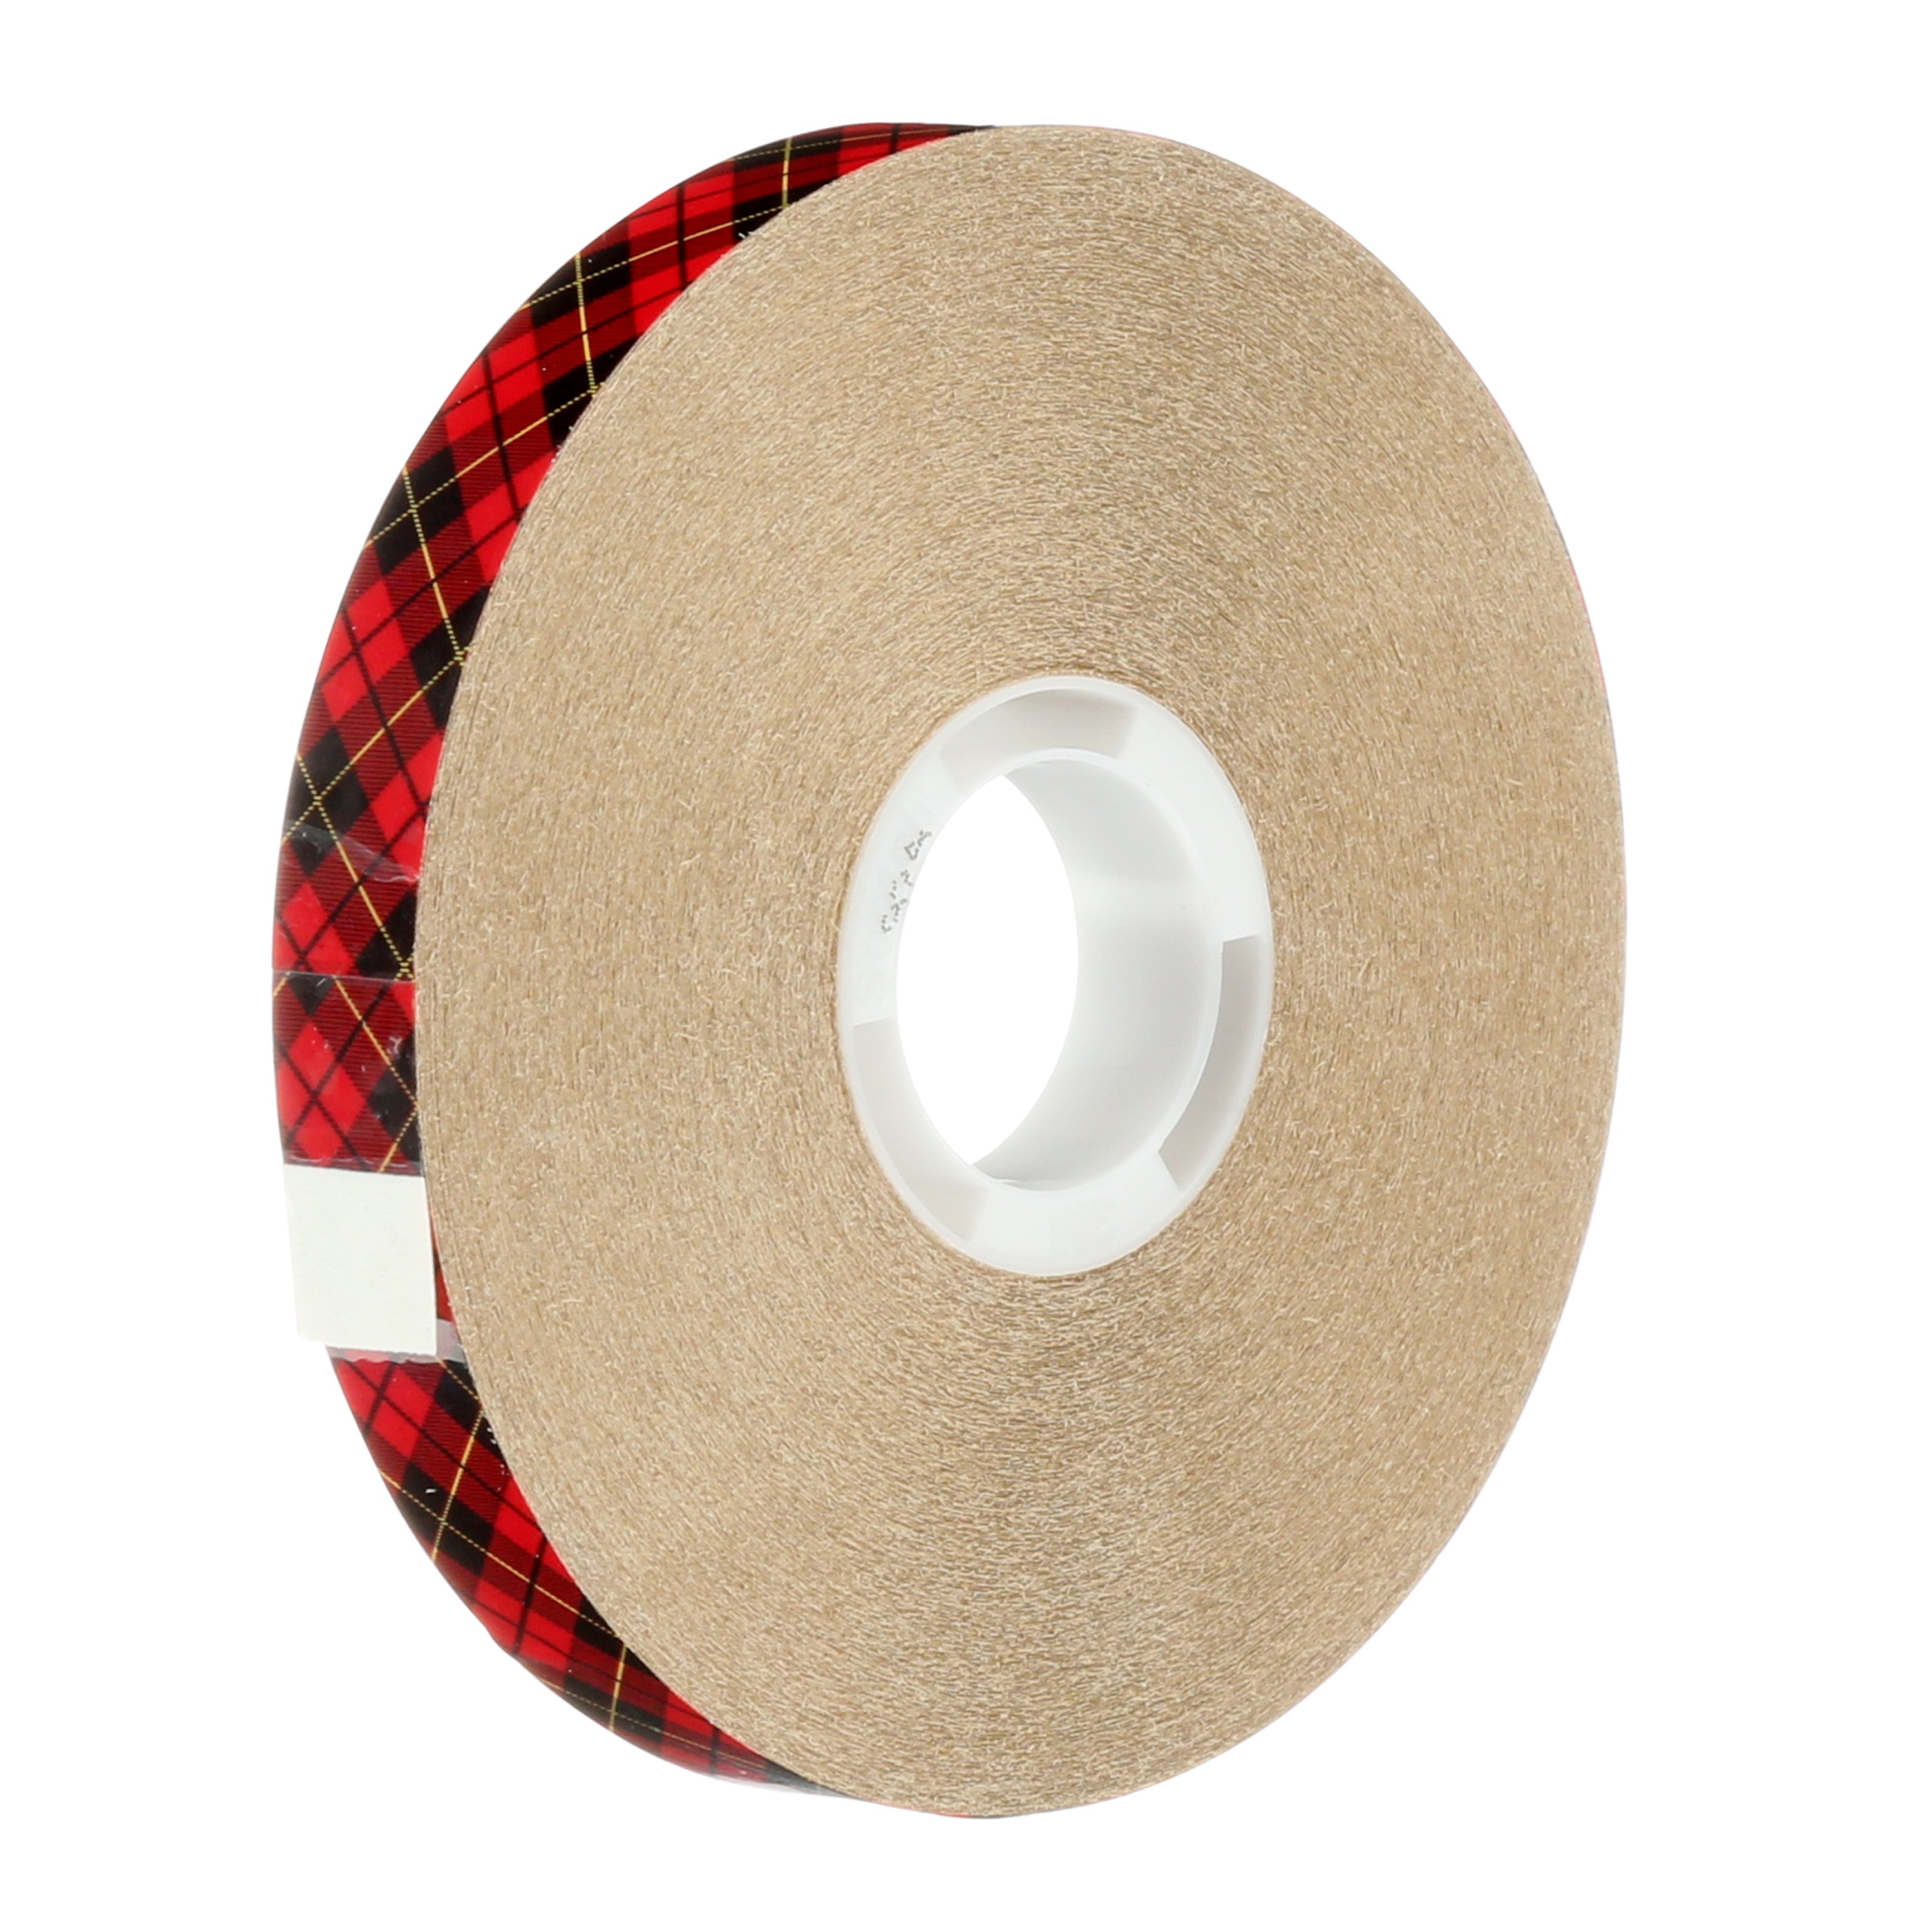 Designed for general purpose applications, Scotch® ATG Adhesive Transfer Tape 924 bonds a wide variety of similar and dissimilar materials such as metals, glass, wood, papers, paints and many plastics.